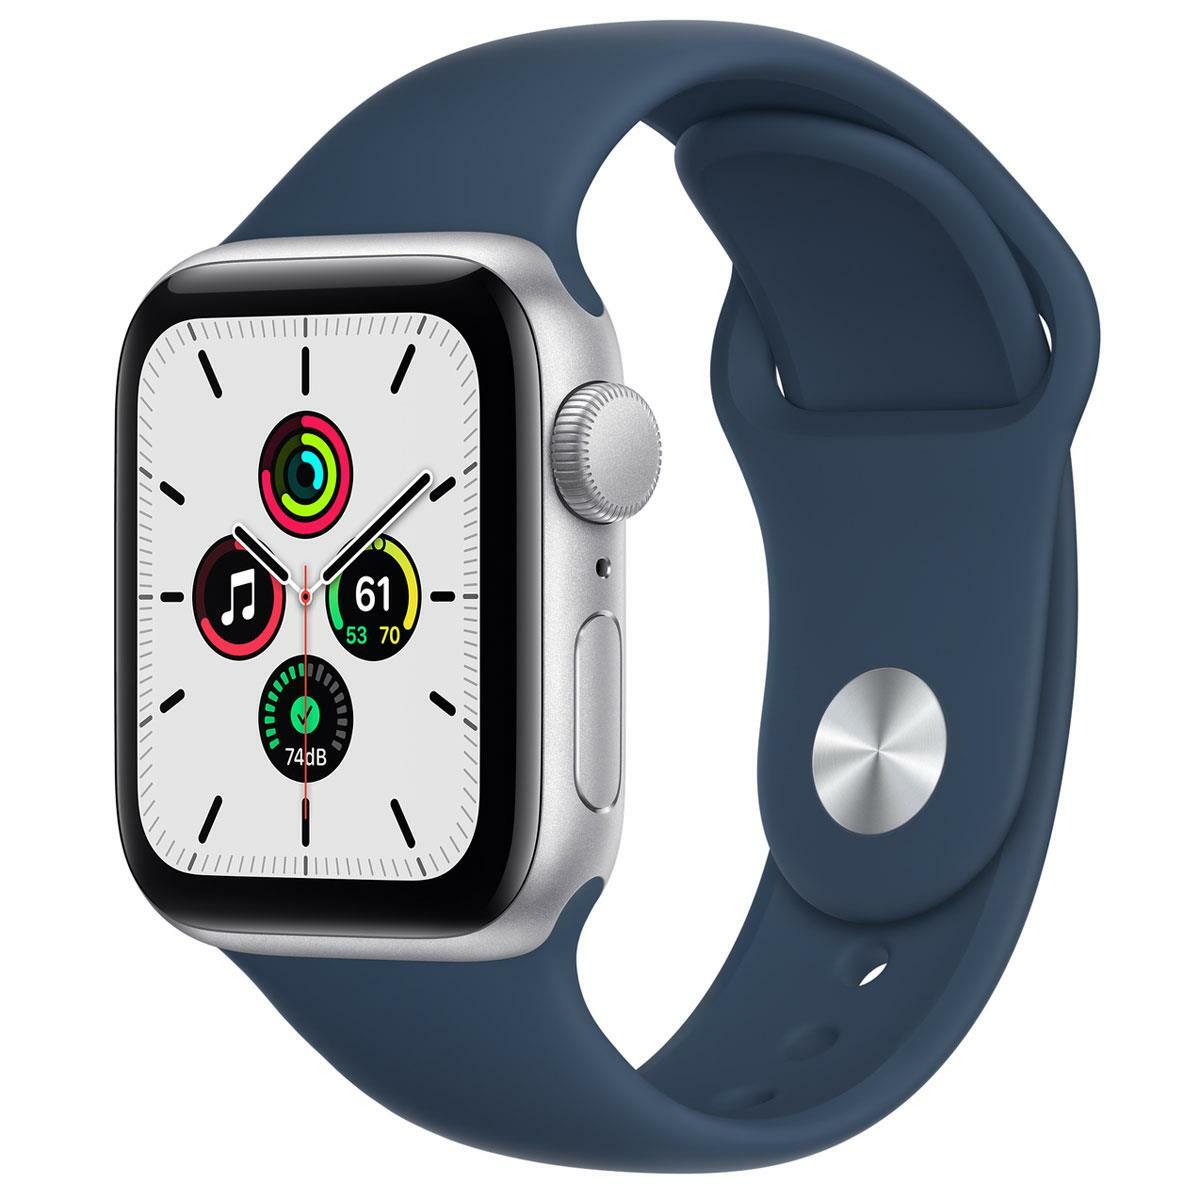 Apple Watch SE 40mm Aluminum Case with Abyss Blue Sport Band